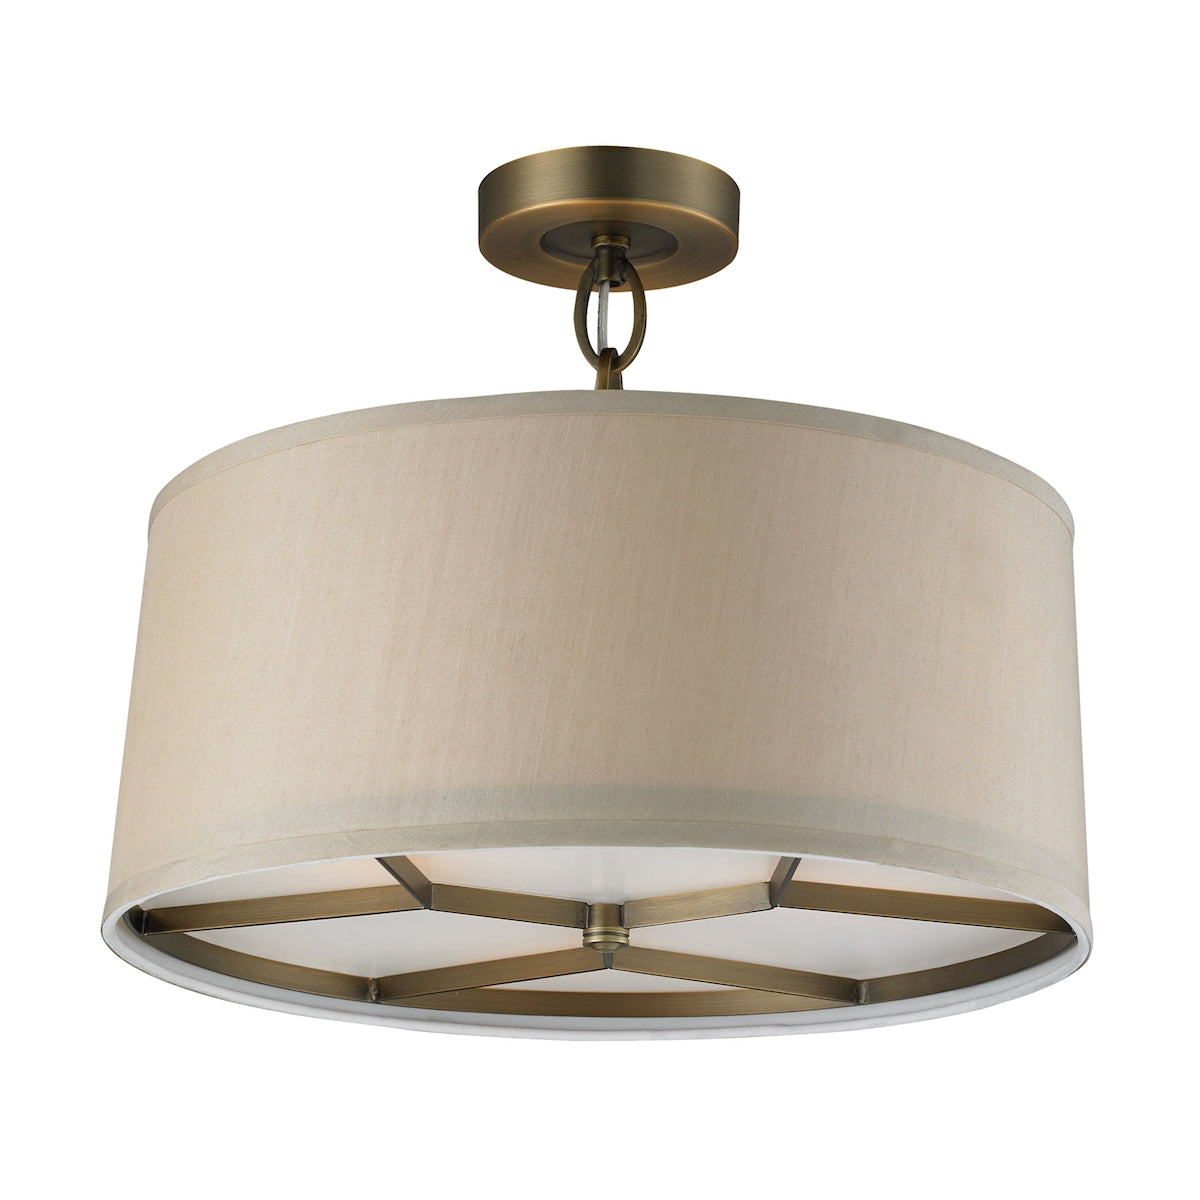 Baxter 3-Light Semi Flush in Brushed Antique Brass with Beige Shade